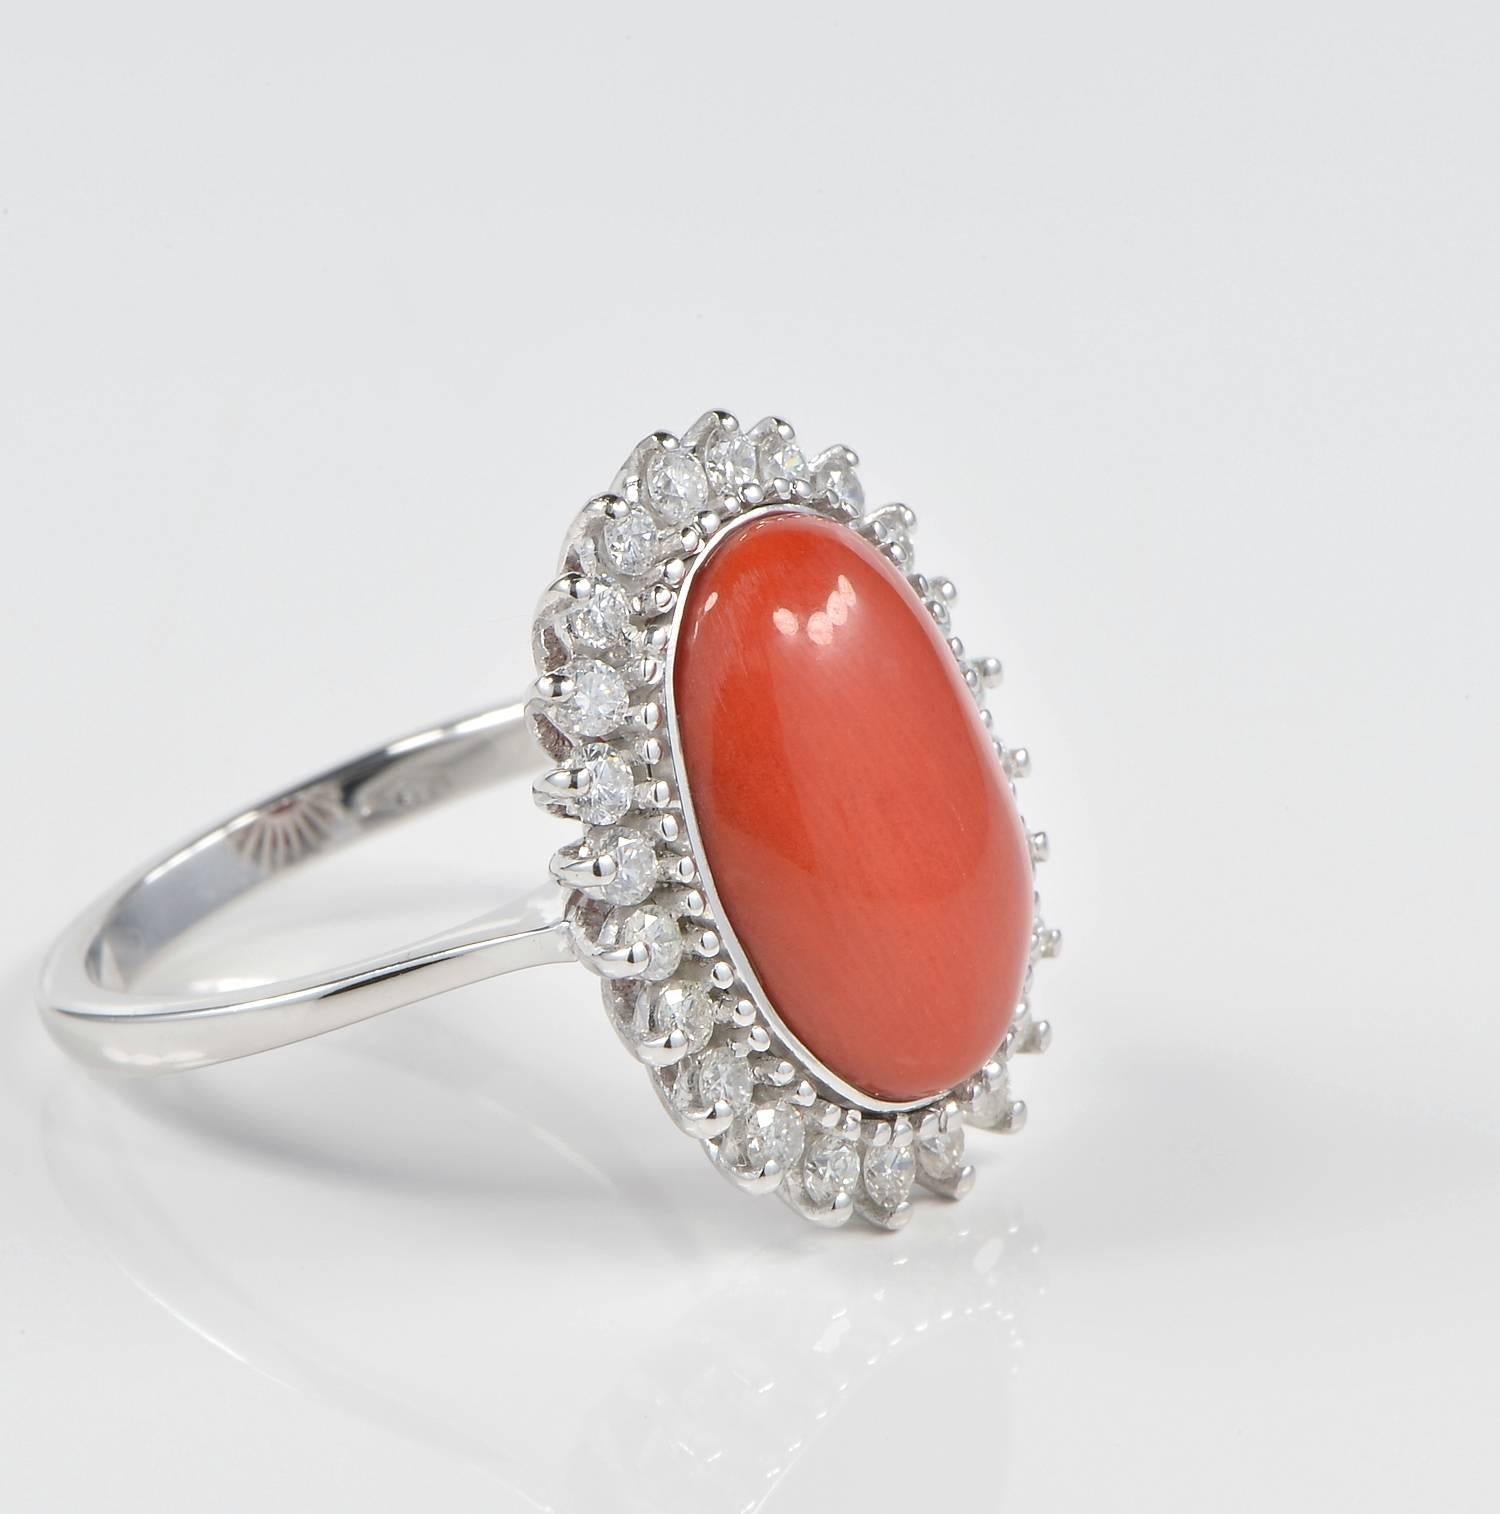 The beauty of coral has fascinated mankind since early times.
This is a stunning Natural un-treated Oxblood cabochon ring with diamond surround.
The intensity of the colour and the perfect polishing of this blemish free coral is to leave